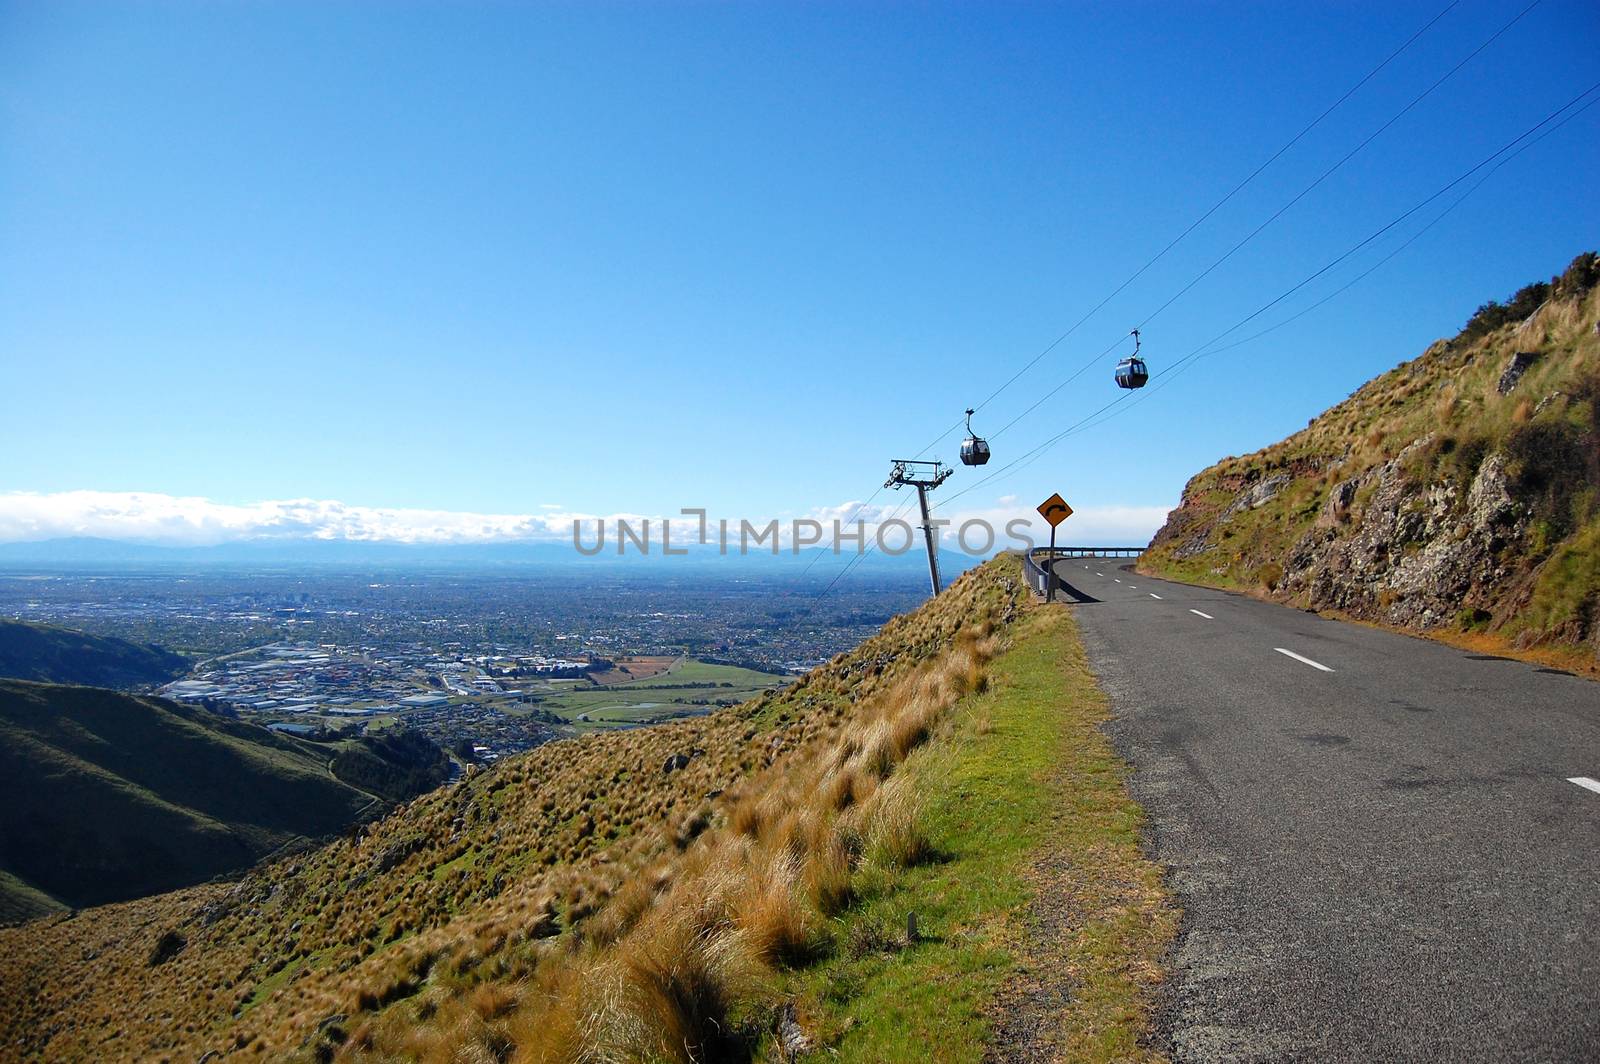 Cable railway over road turns right town view, Christchurch, Canterbury Region, South Island, New Zealand